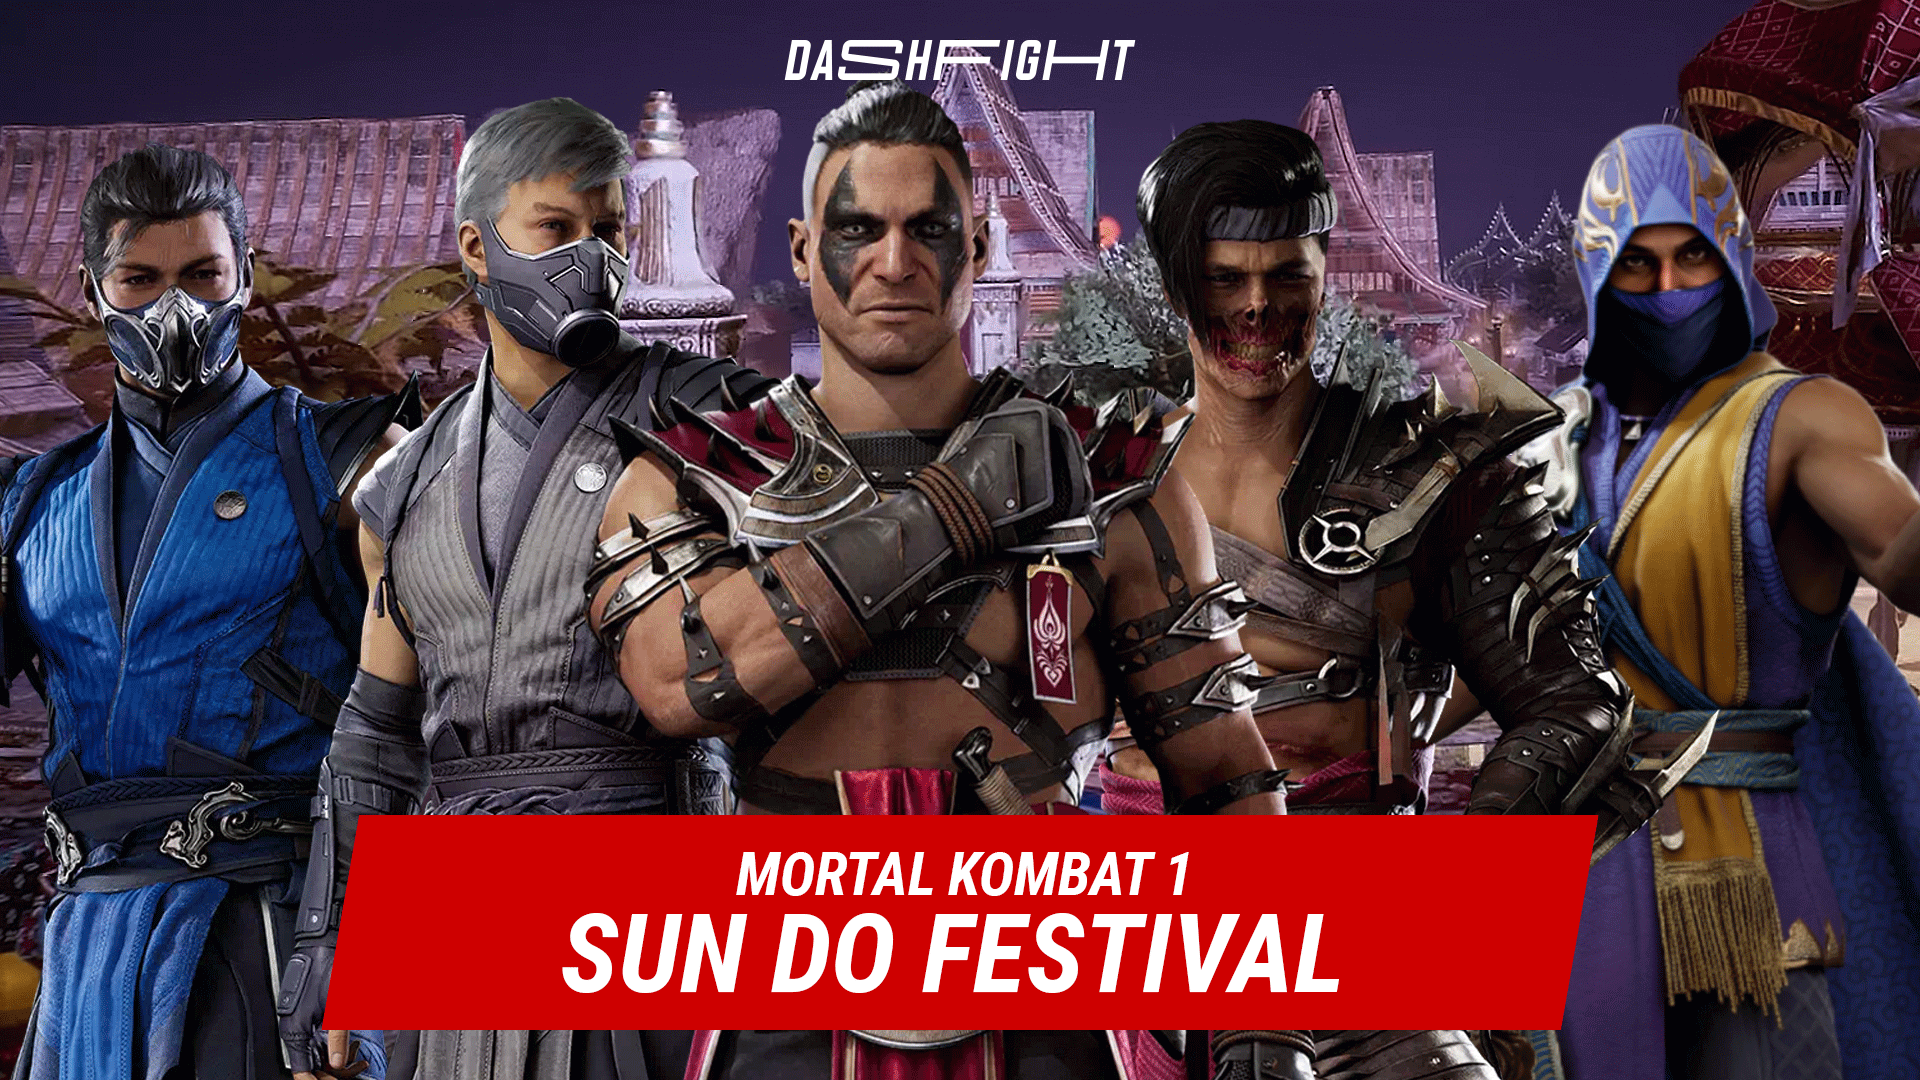  The MK Fatality Fest, Part II